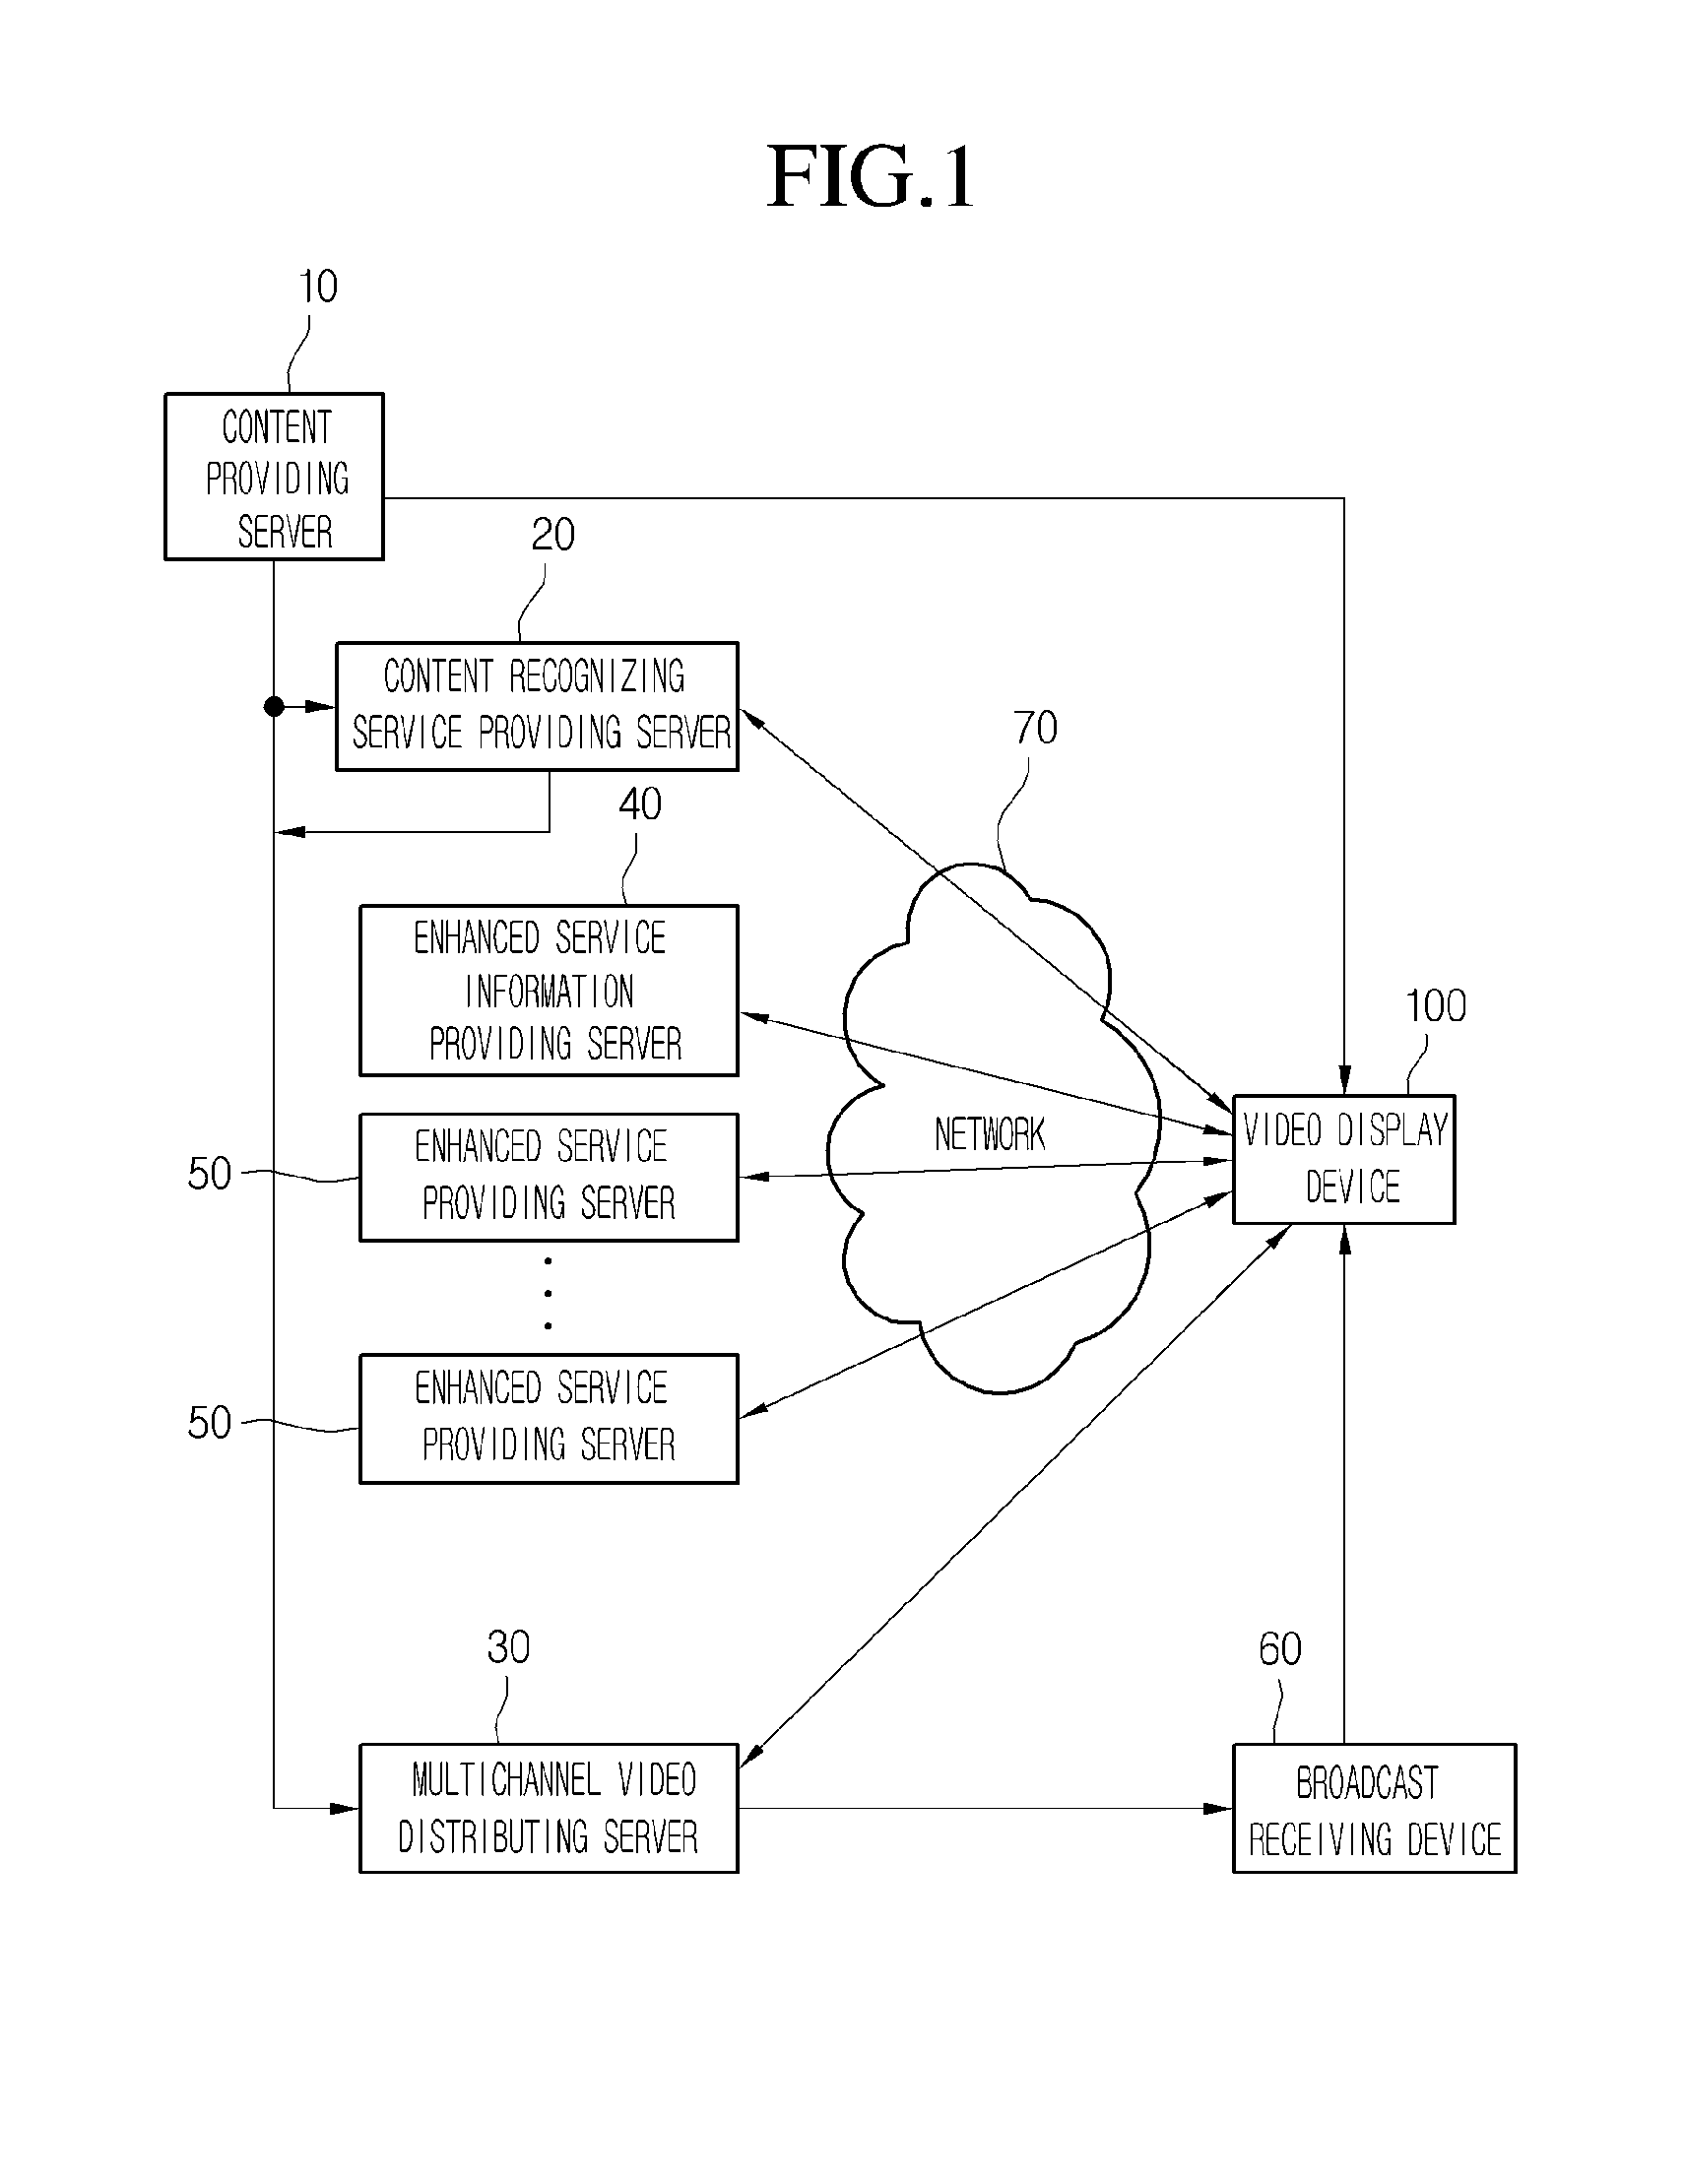 Image display apparatus and method for operating same